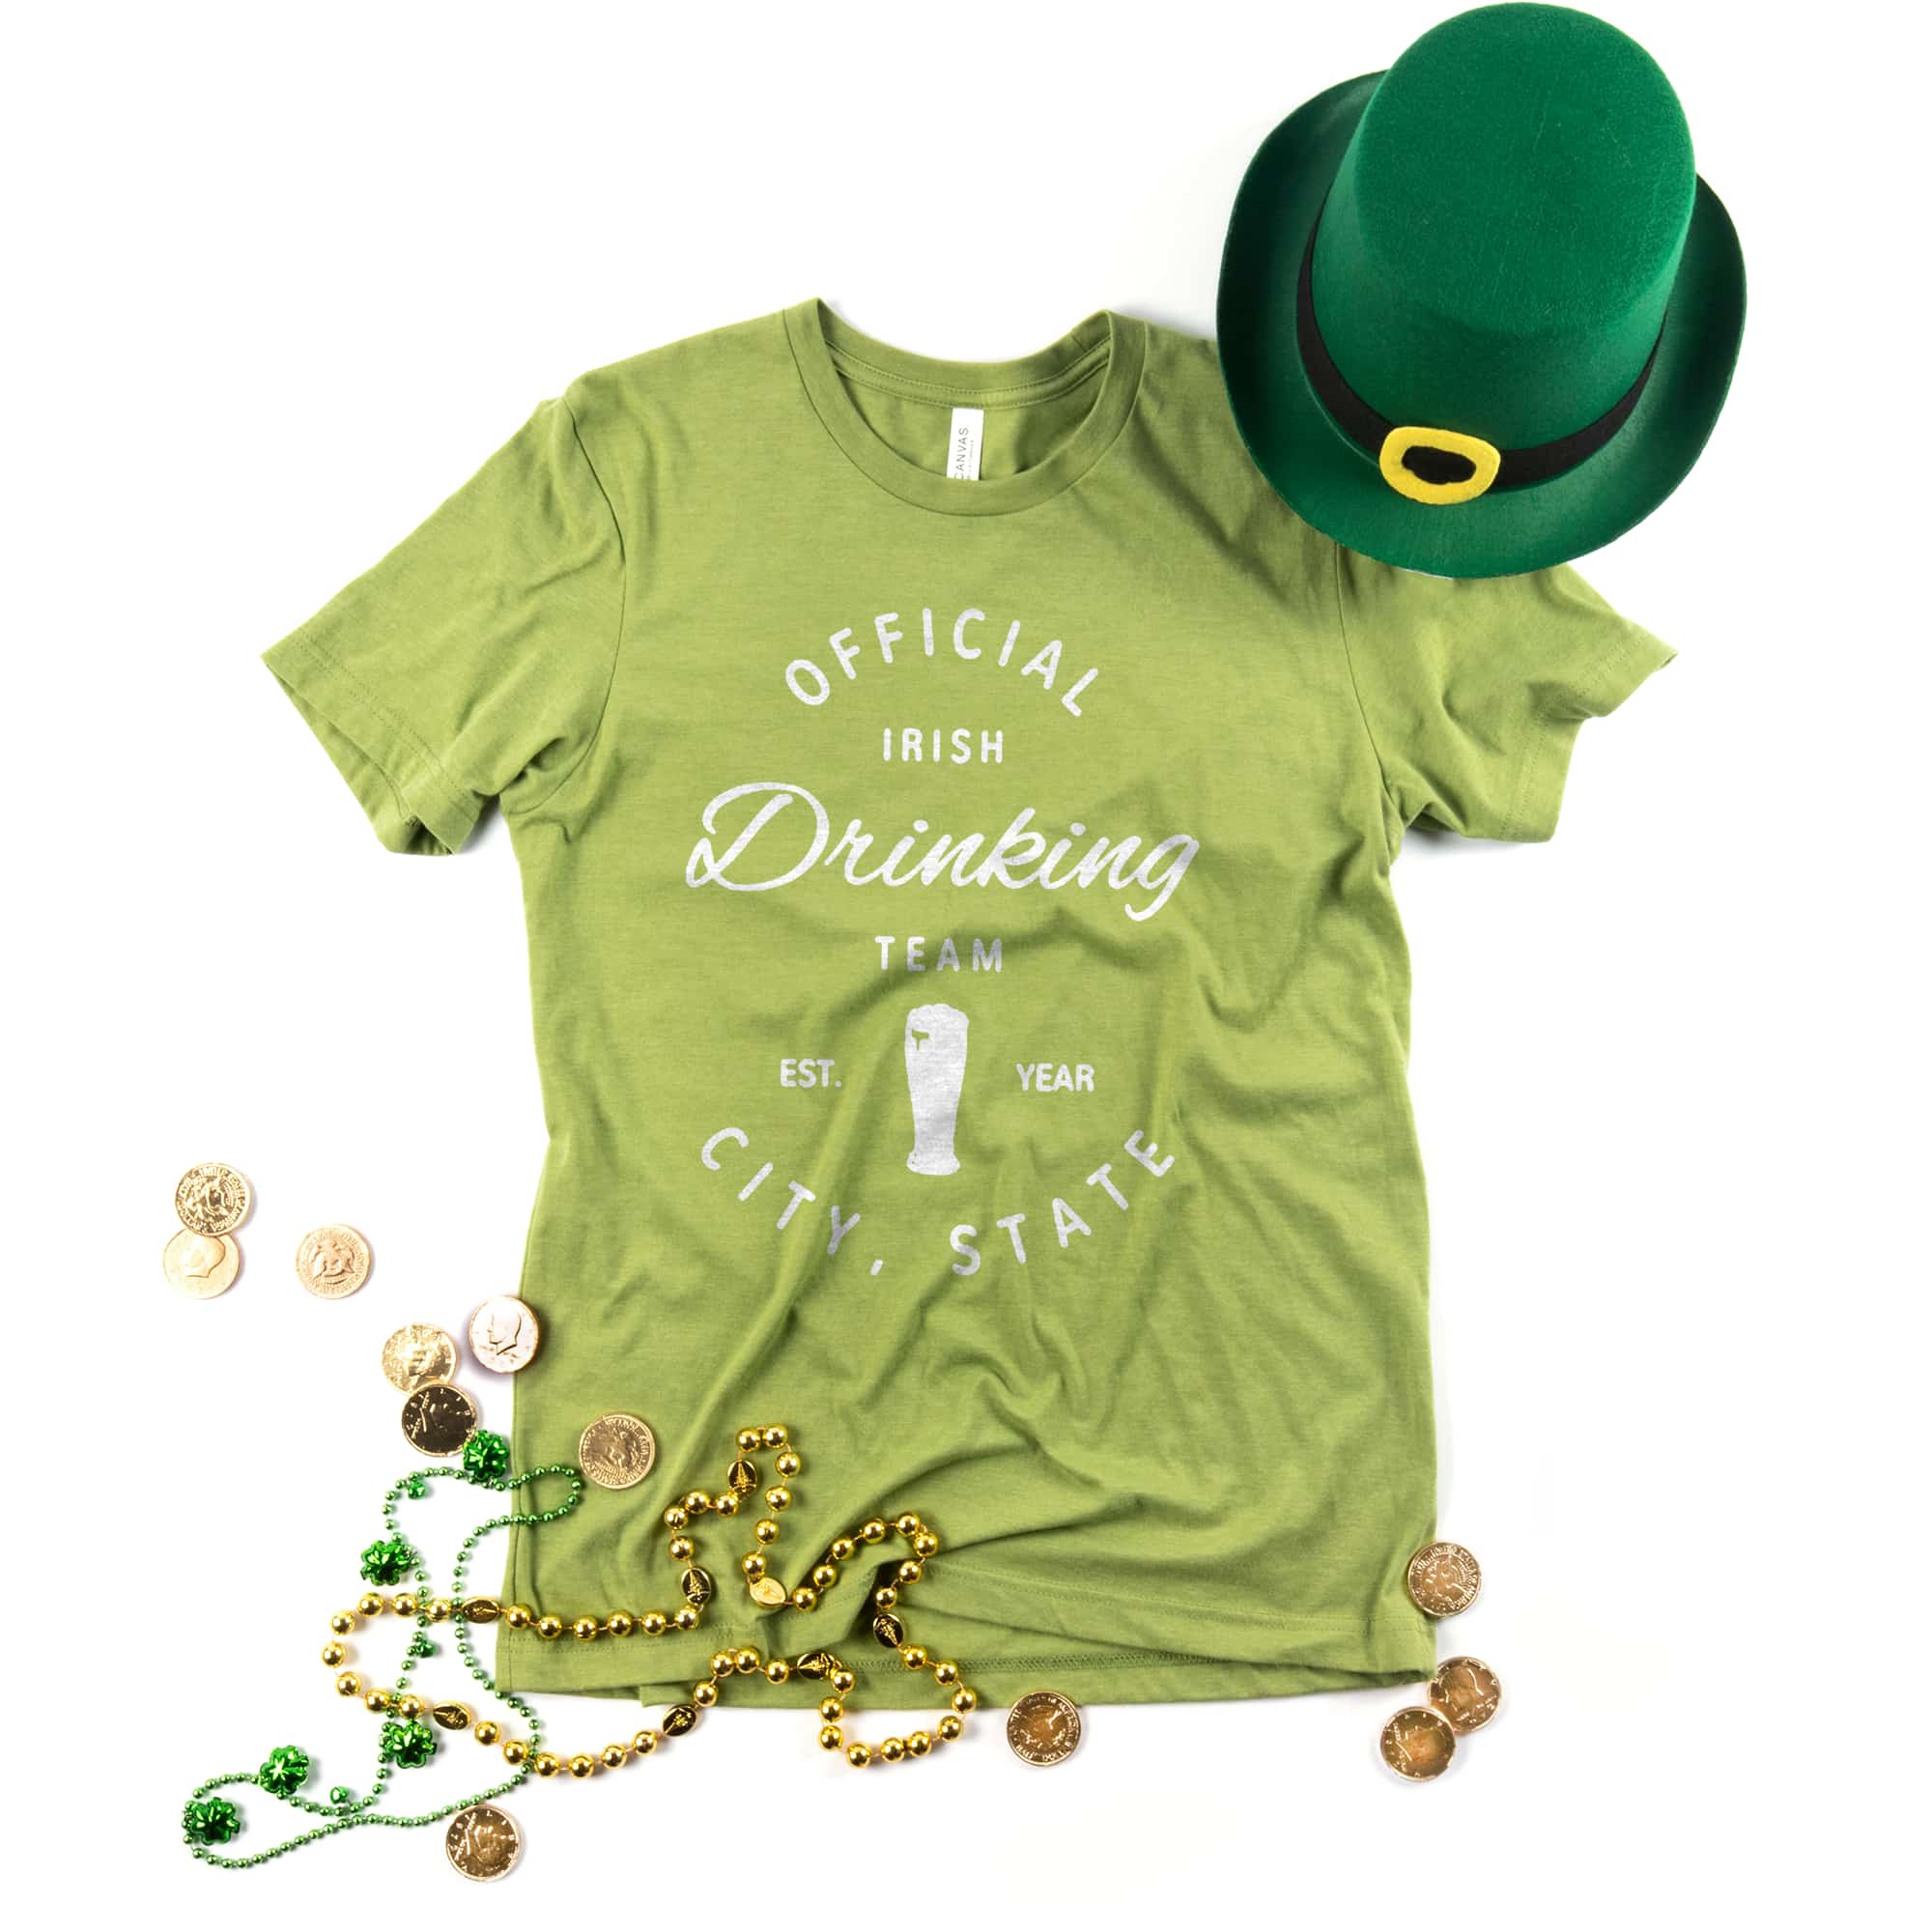 An example St. Patrick's day t-shirt design on a Canvas Jersey T-Shirt.